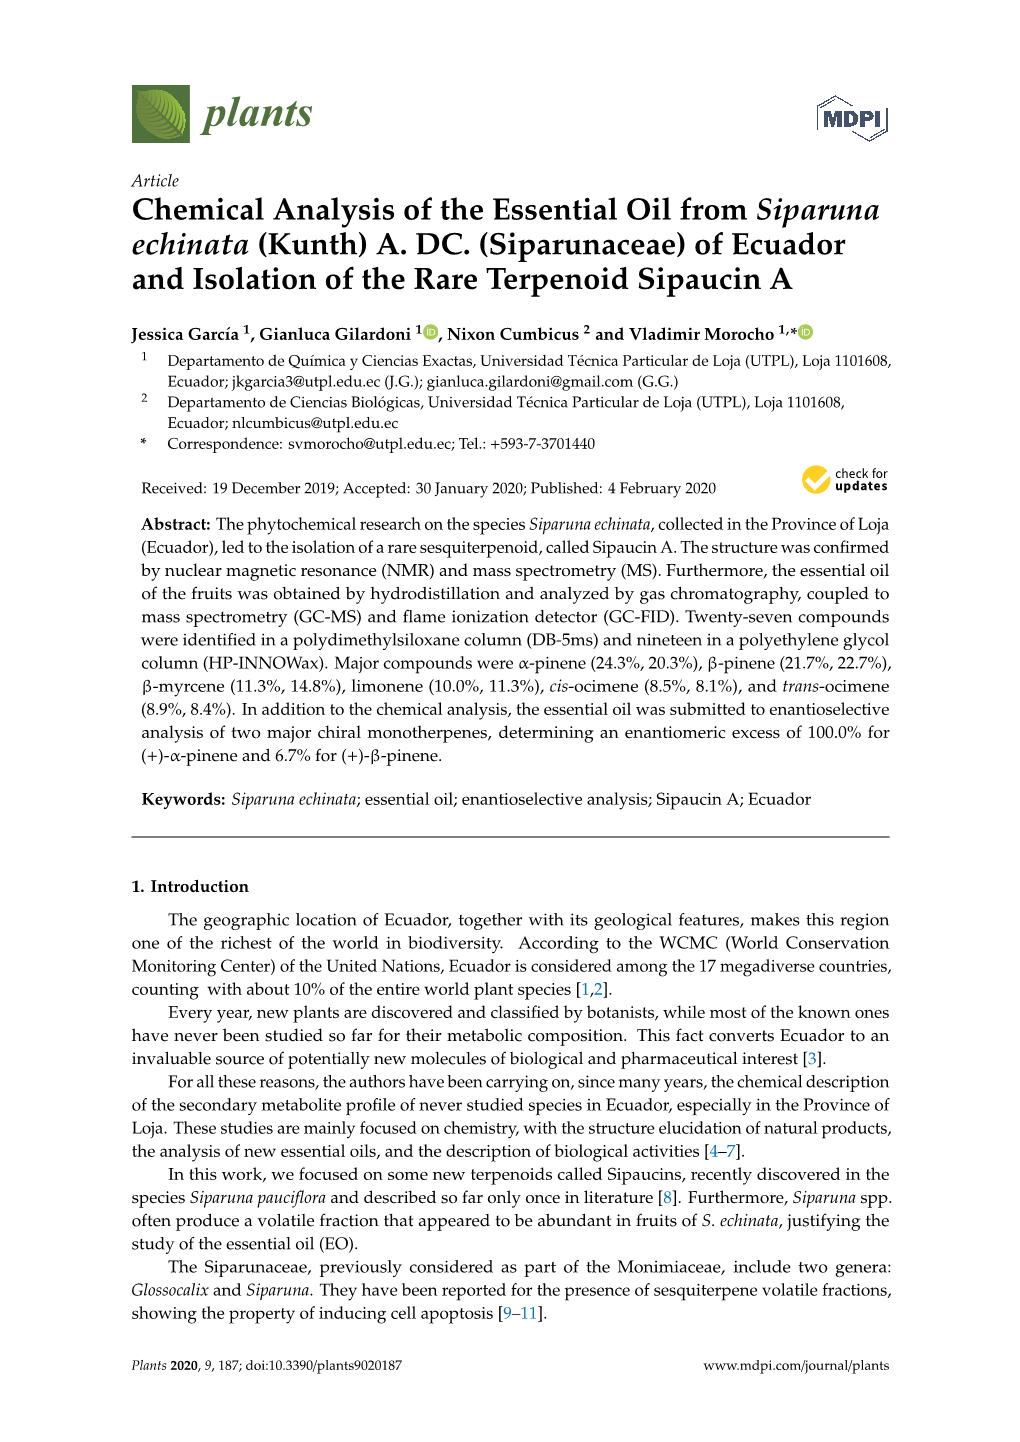 Chemical Analysis of the Essential Oil from Siparuna Echinata (Kunth) A